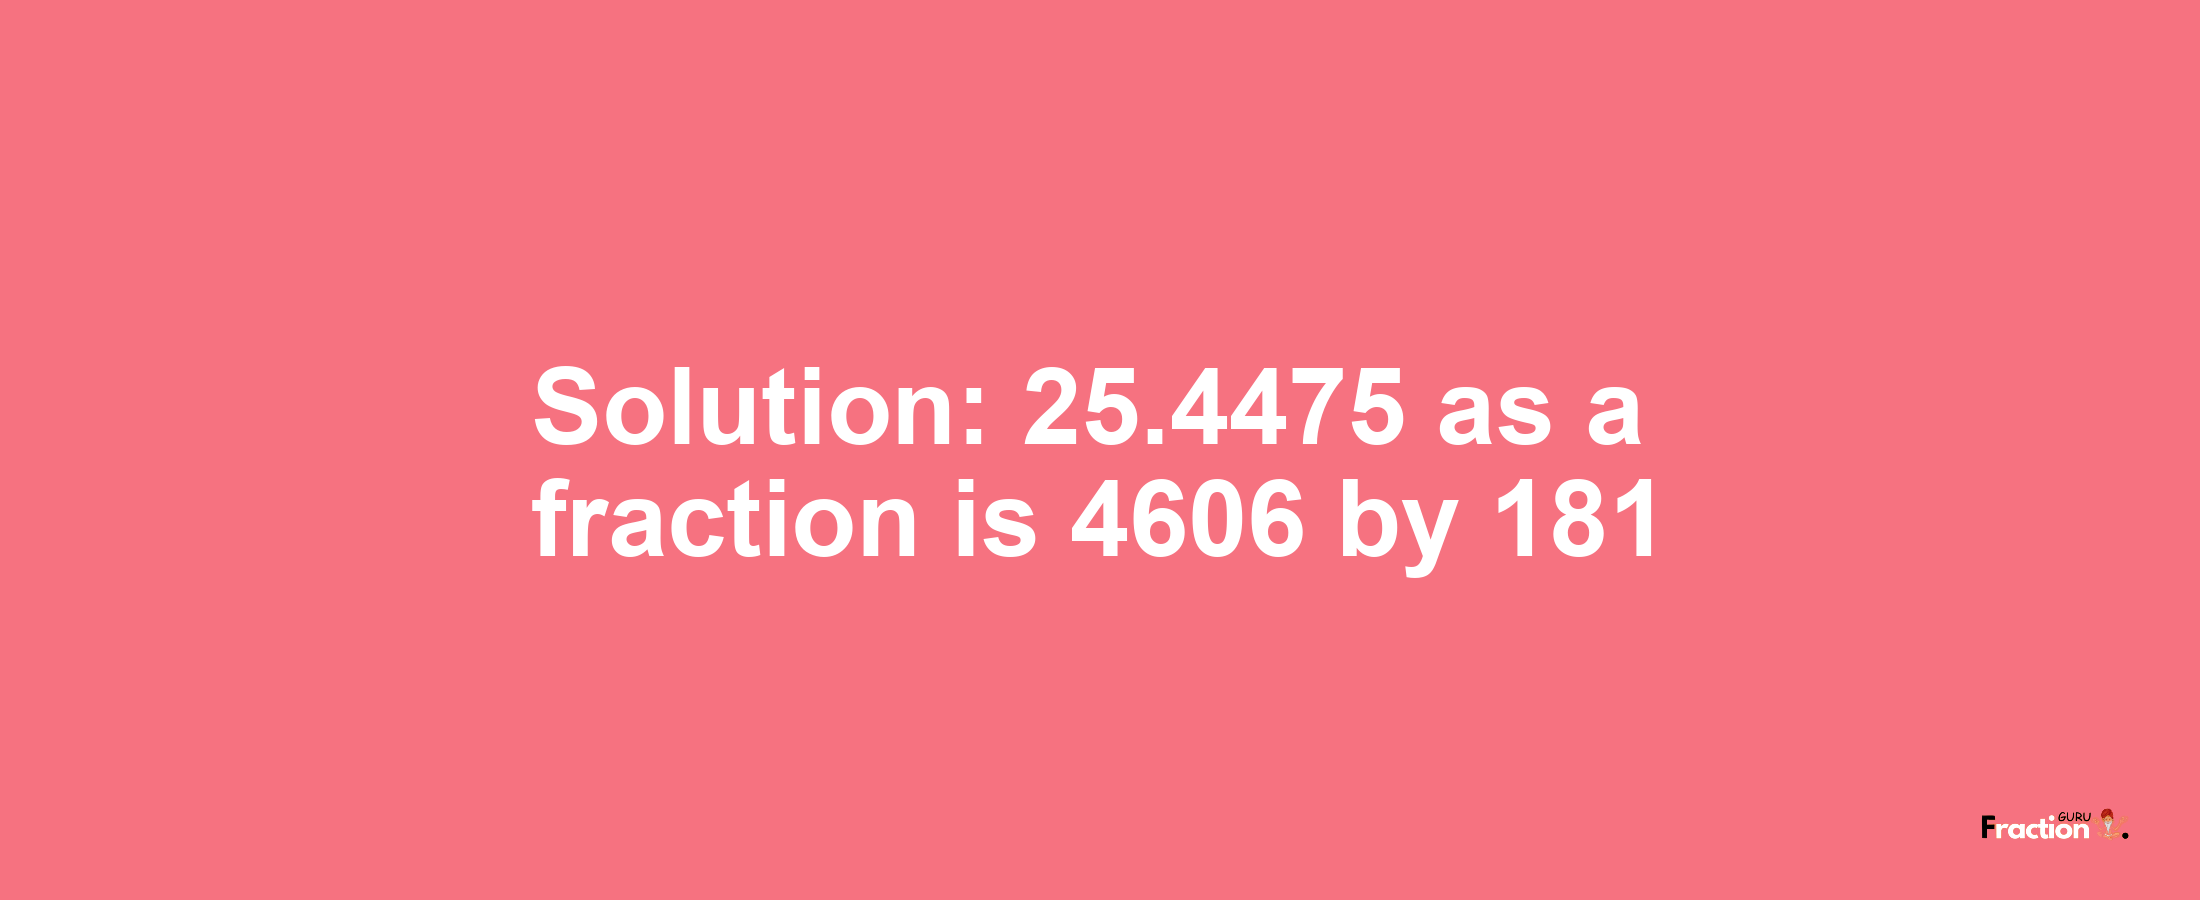 Solution:25.4475 as a fraction is 4606/181